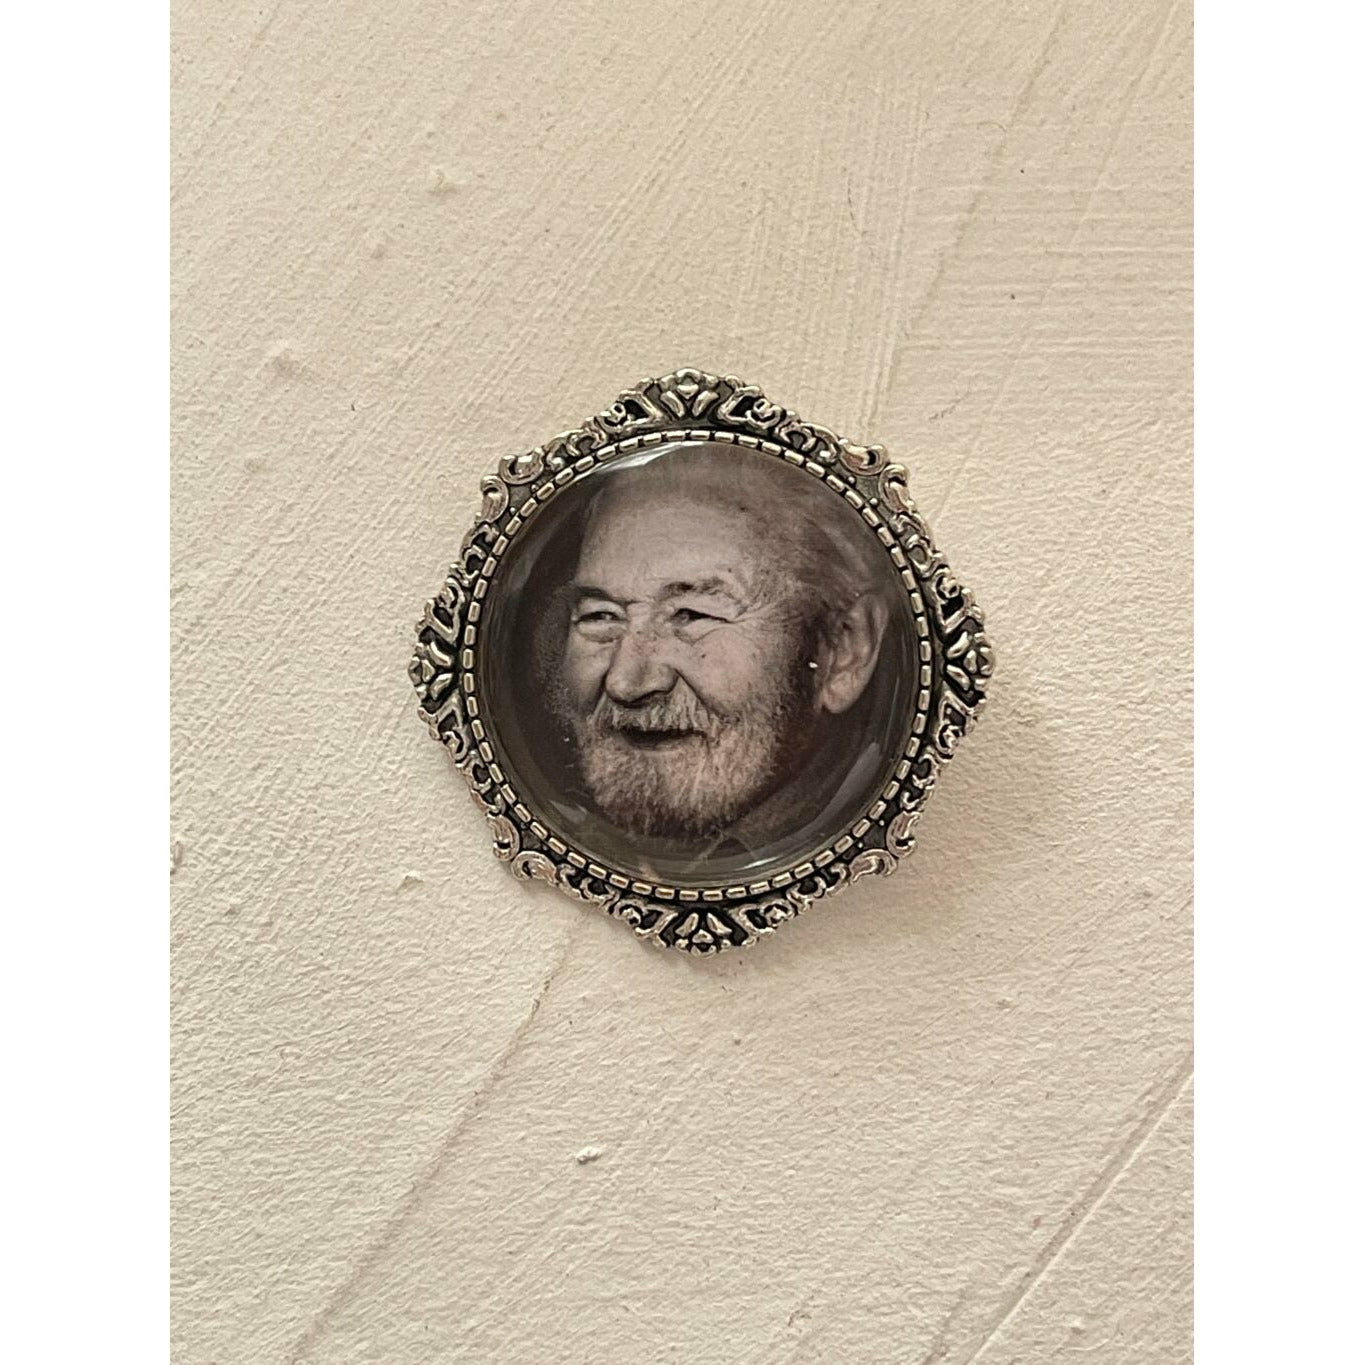 A memorial brooch or memorial pin in the design called Lace showing a photo of a grandfather. The pin is show on a neutral white background and is intended to be pinned to a wedding bouquet or wedding jacket to include a deceased relative on your wedding day.